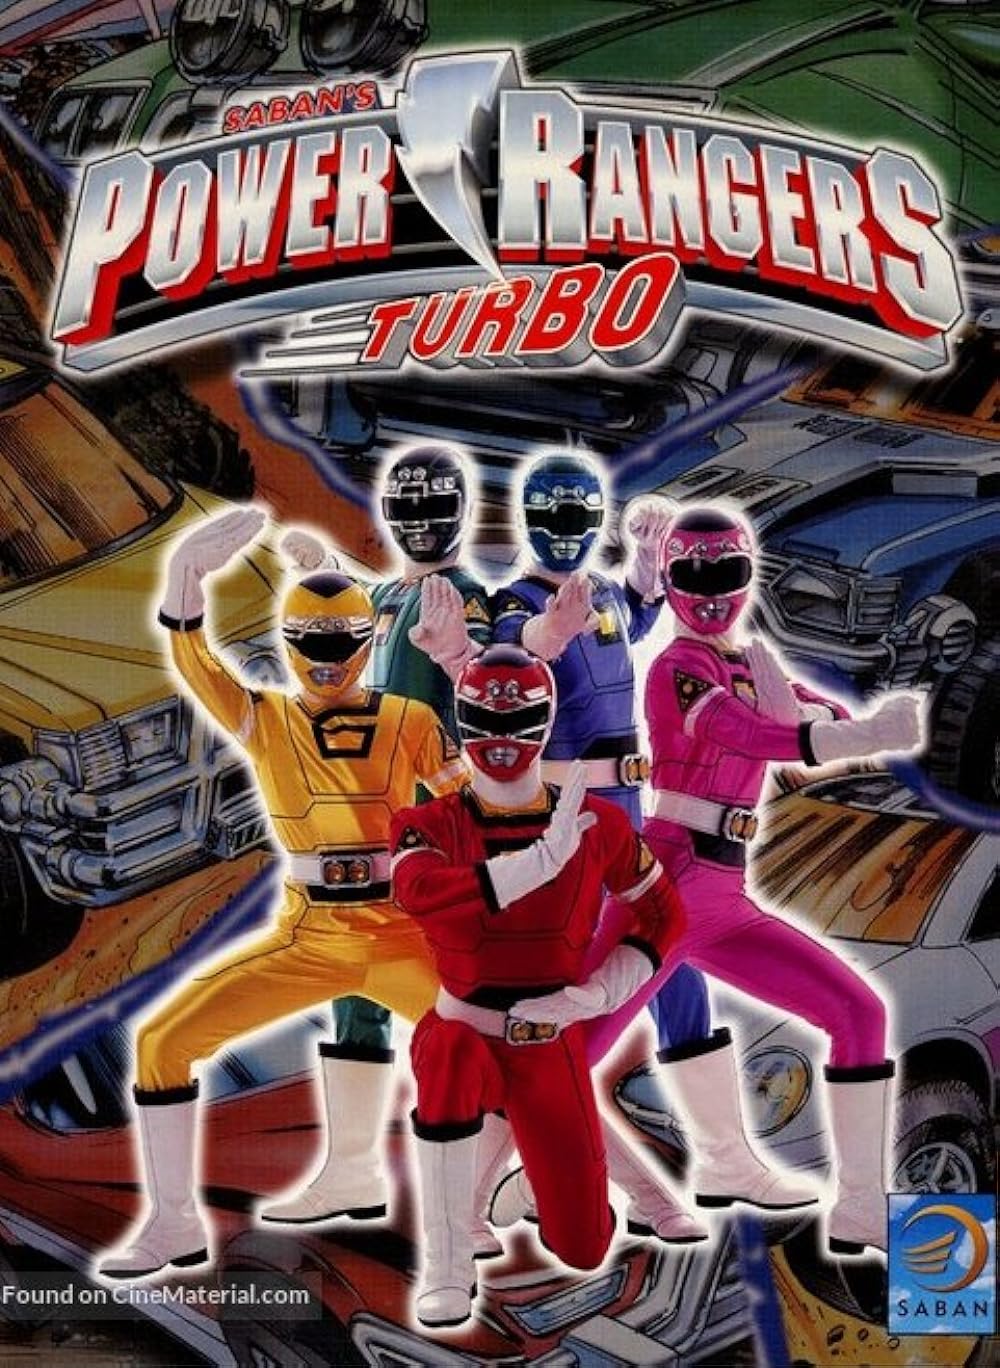 david blakey recommends power rangers turbo videos pic